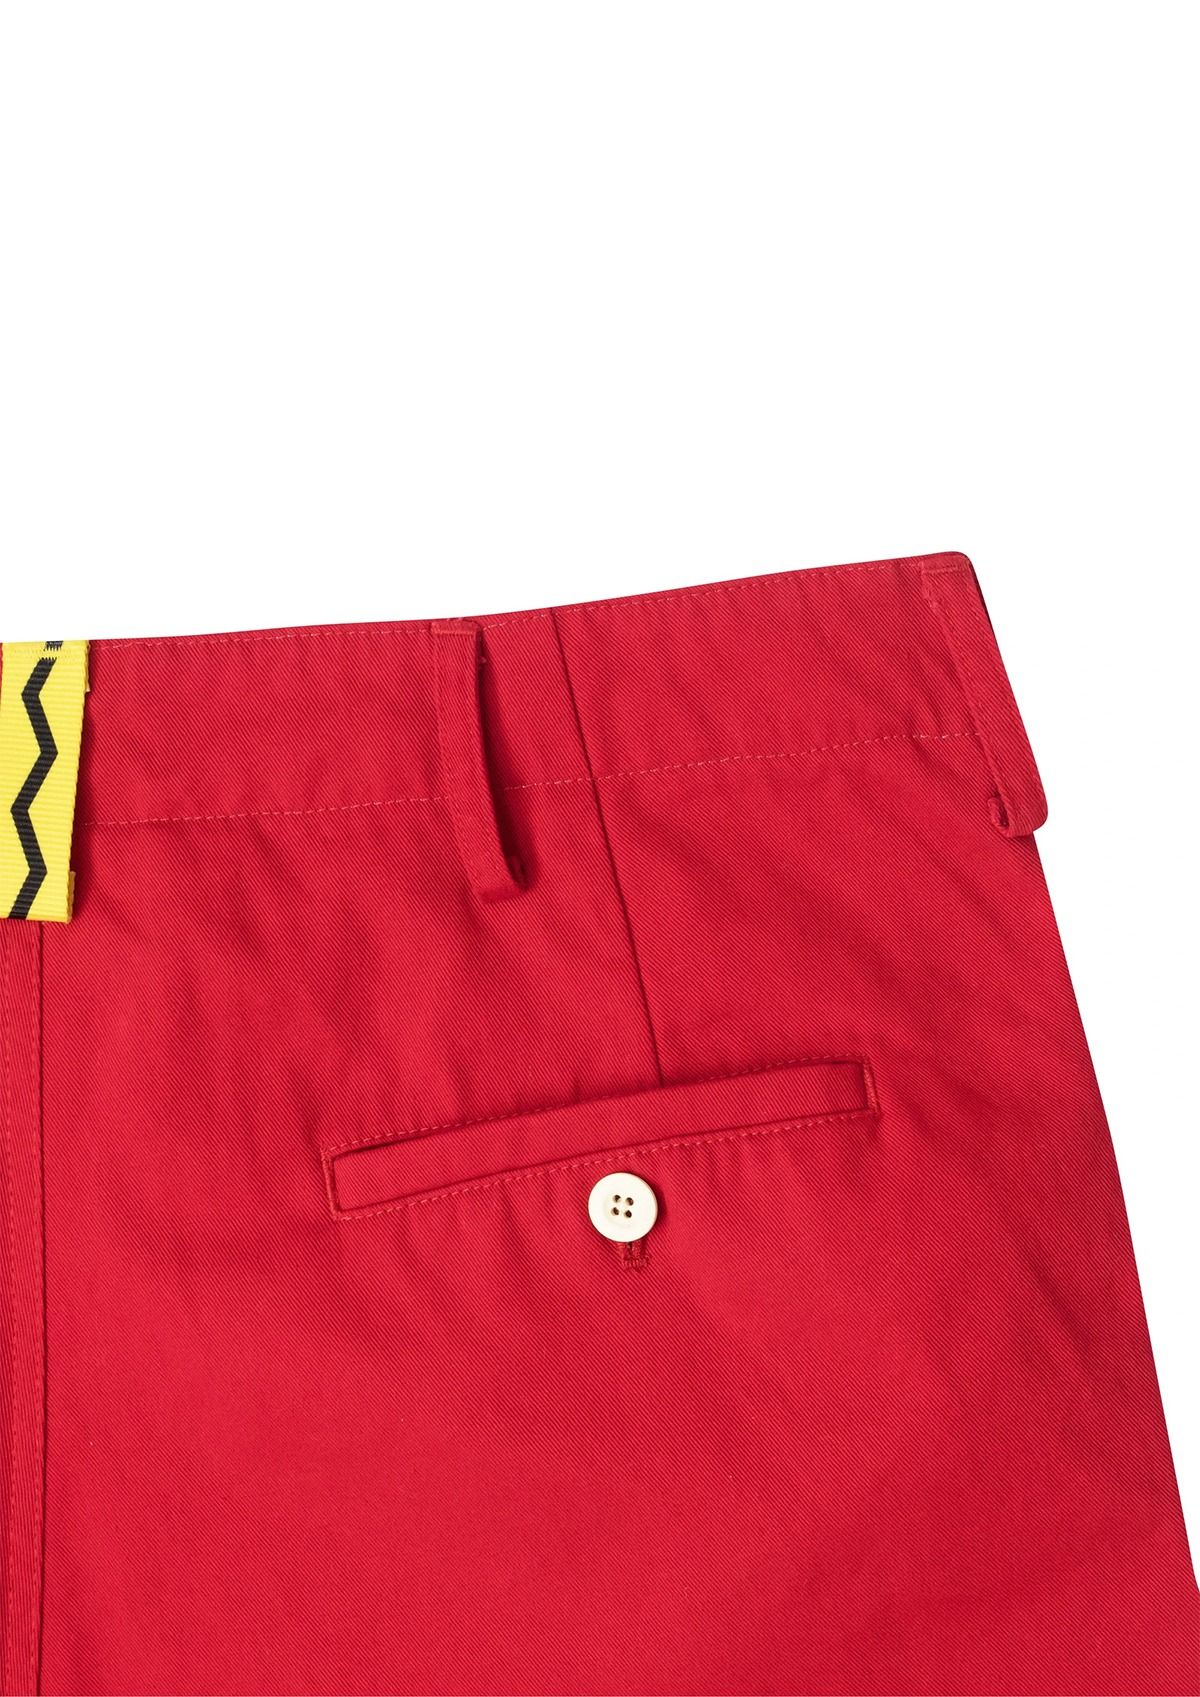 ROWING BLAZERS RED COTTON TWILL WIDE TROUSER